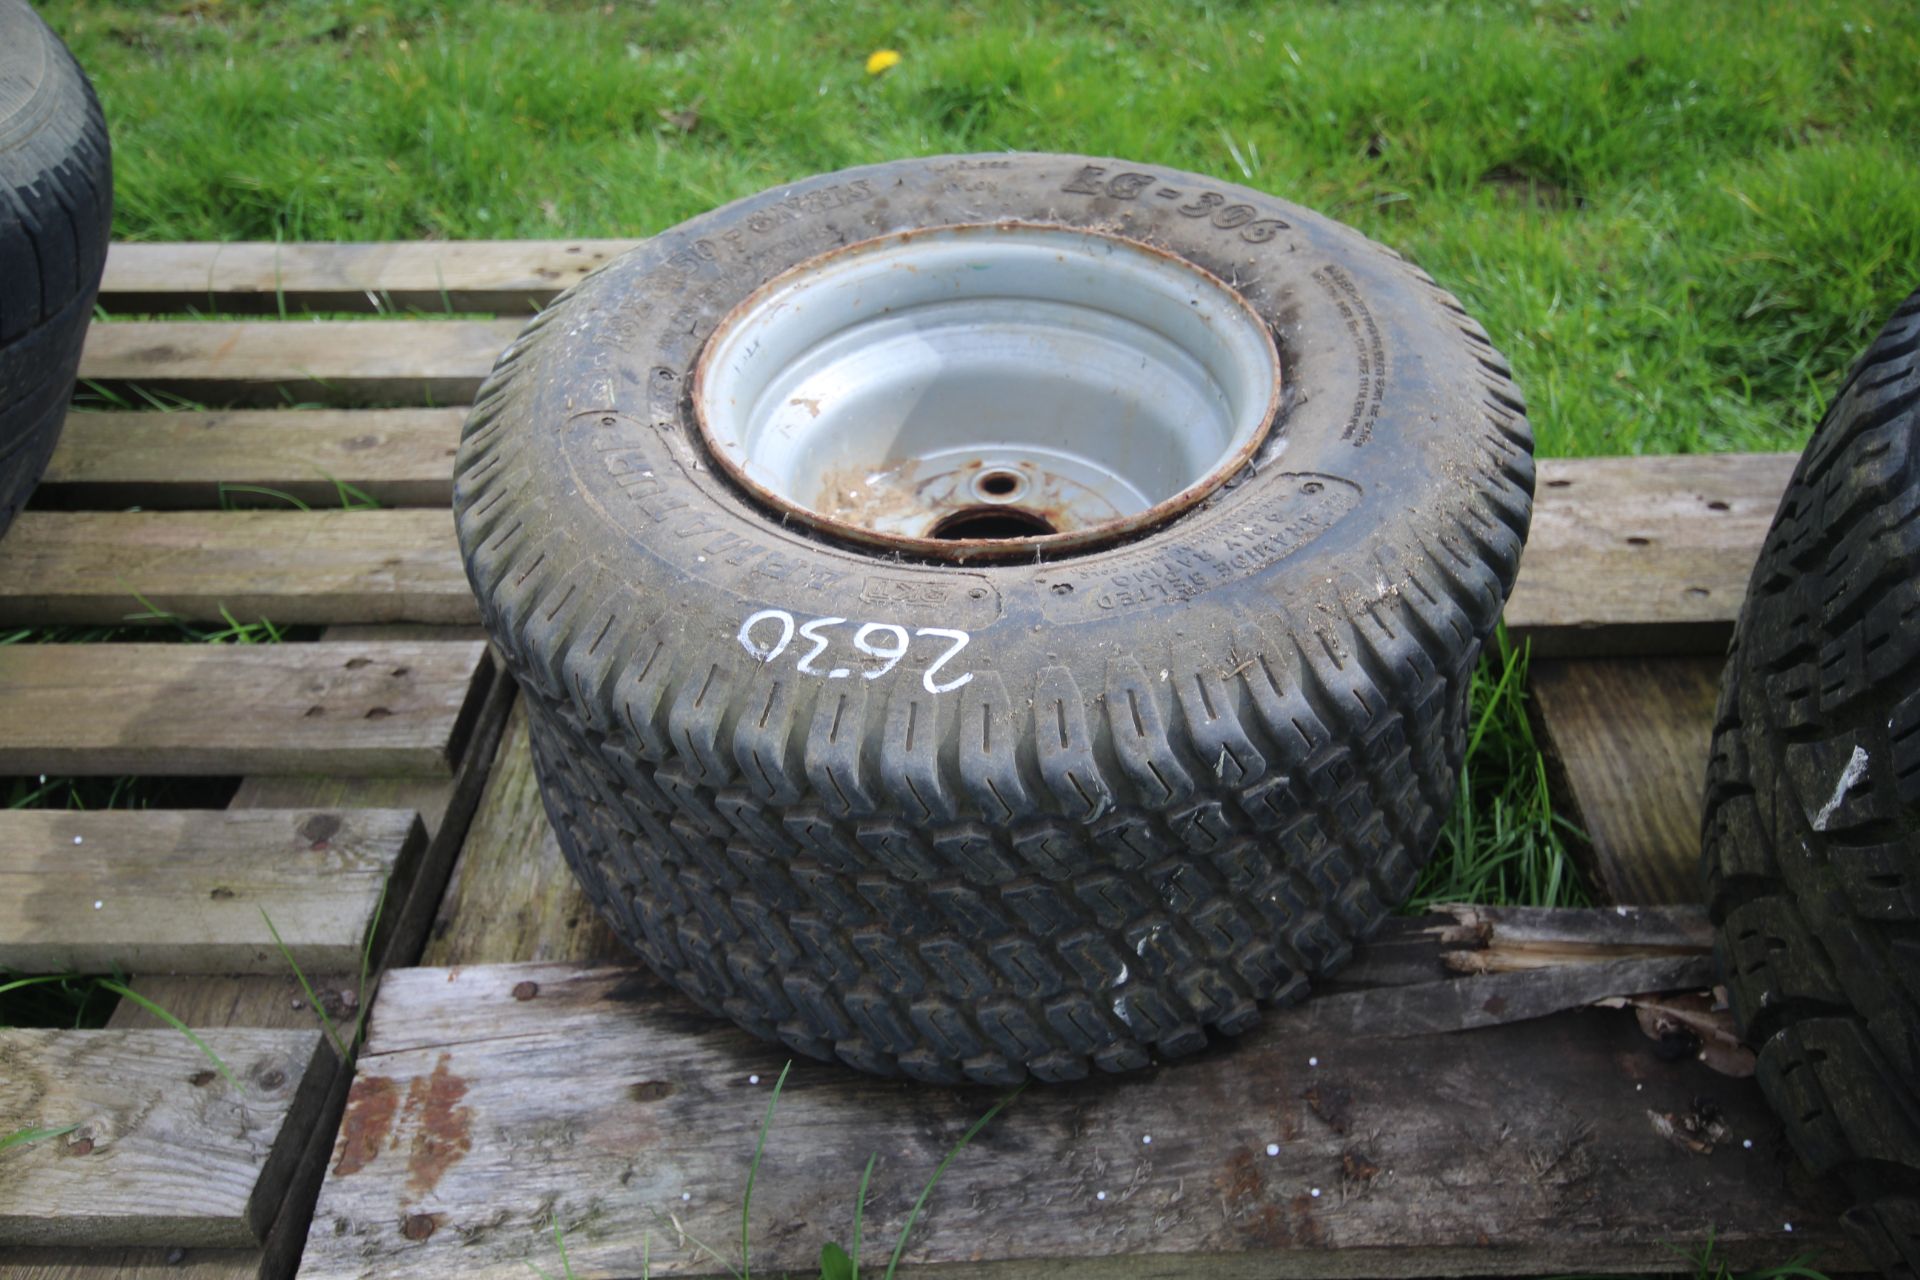 18x8.50-8NHS turf wheel and tyre.